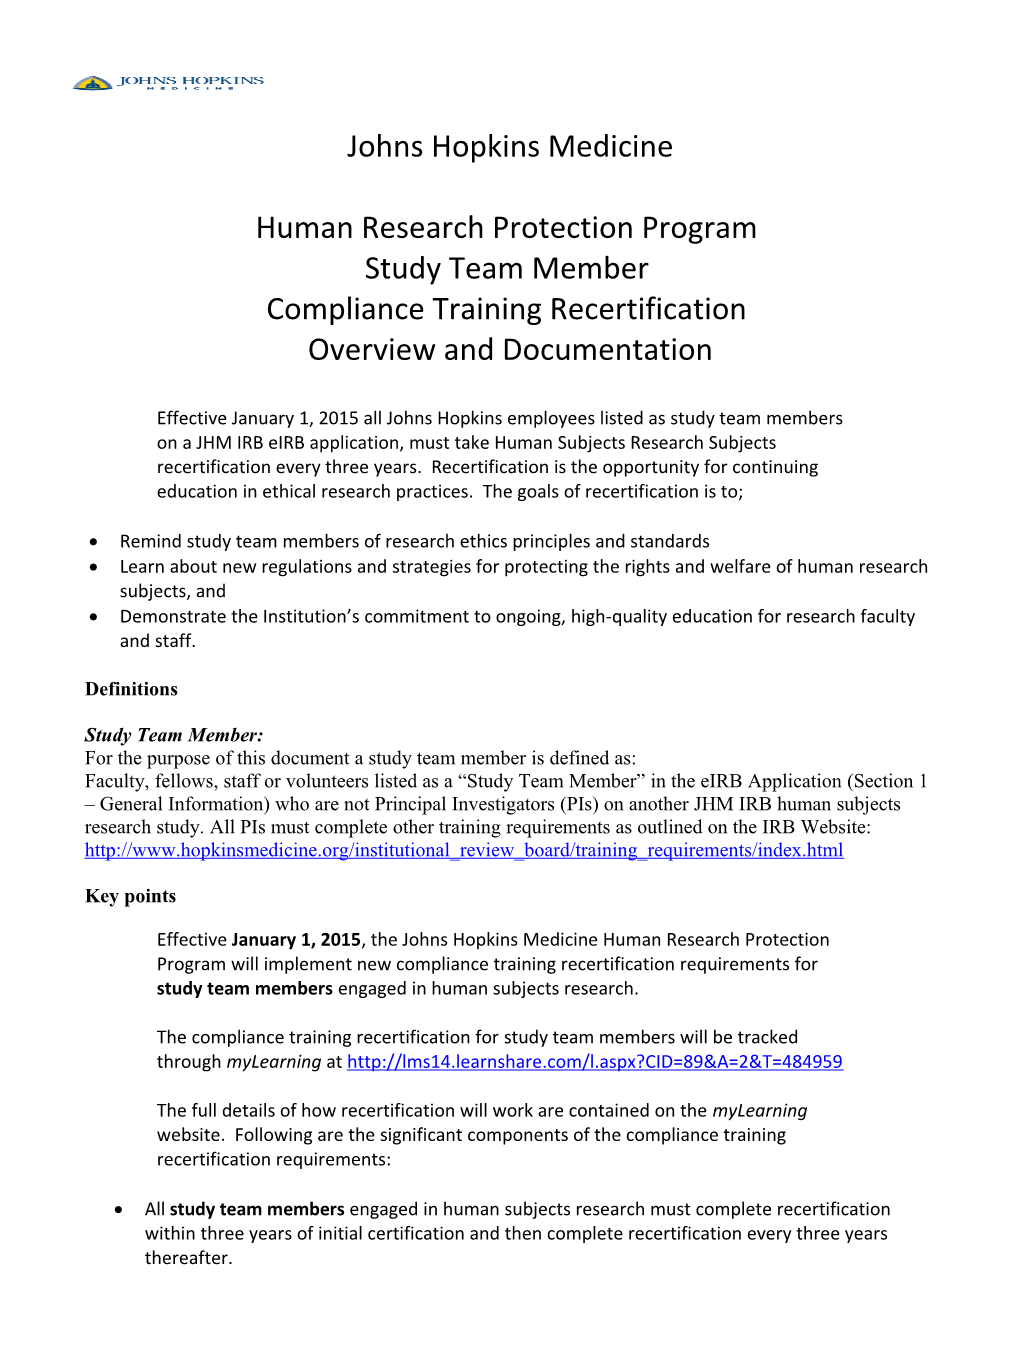 Human Research Protection Program